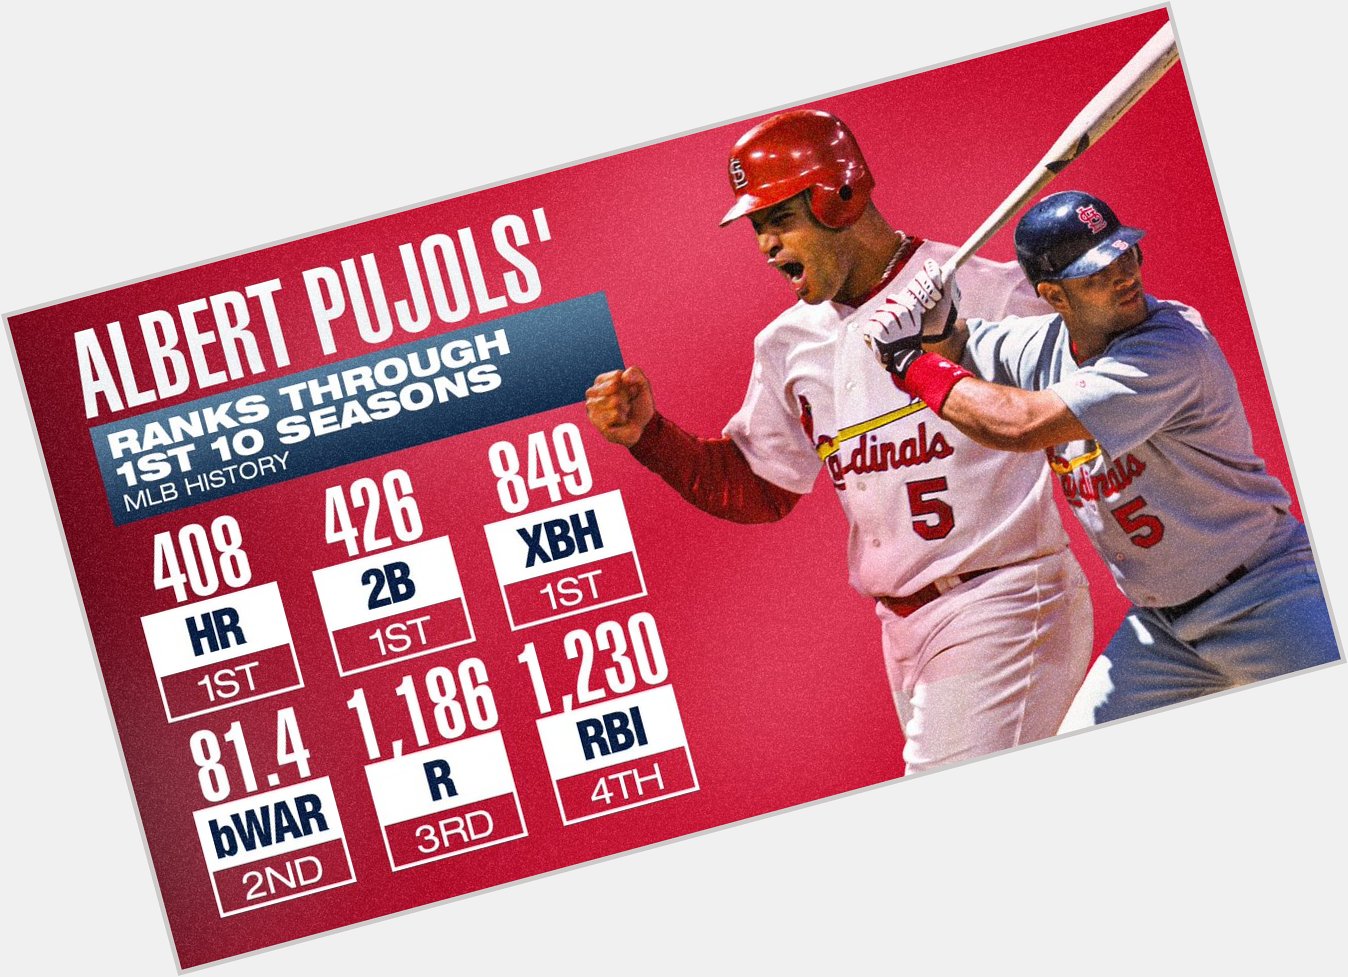 Happy birthday, Albert Pujols!

The Machine dominated baseball his first decade in the league. 